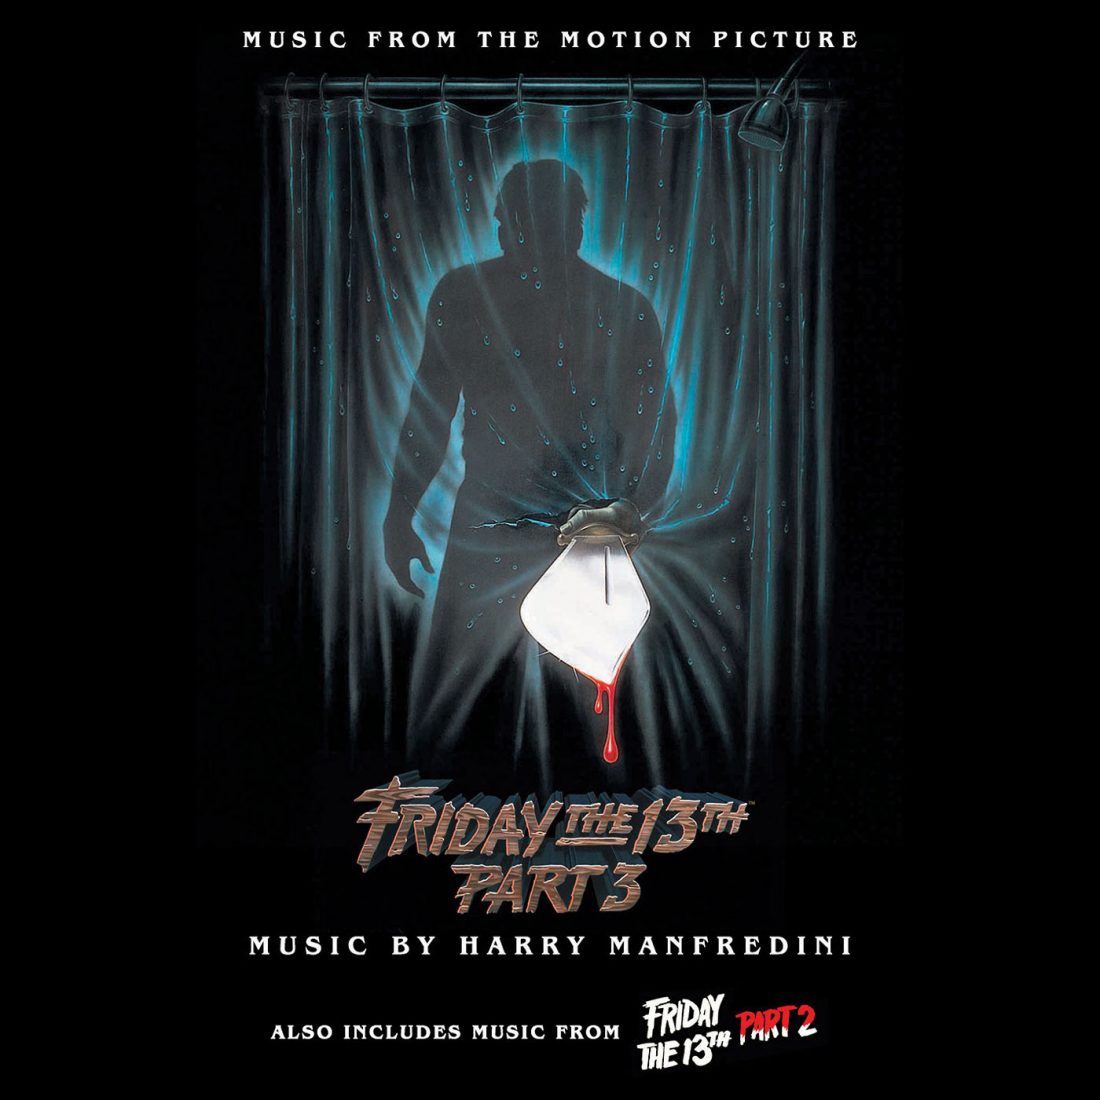 Friday the 13th Parts 2 and 3: Music from the Motion Pictures by Harry Manfredini – Limited Edition